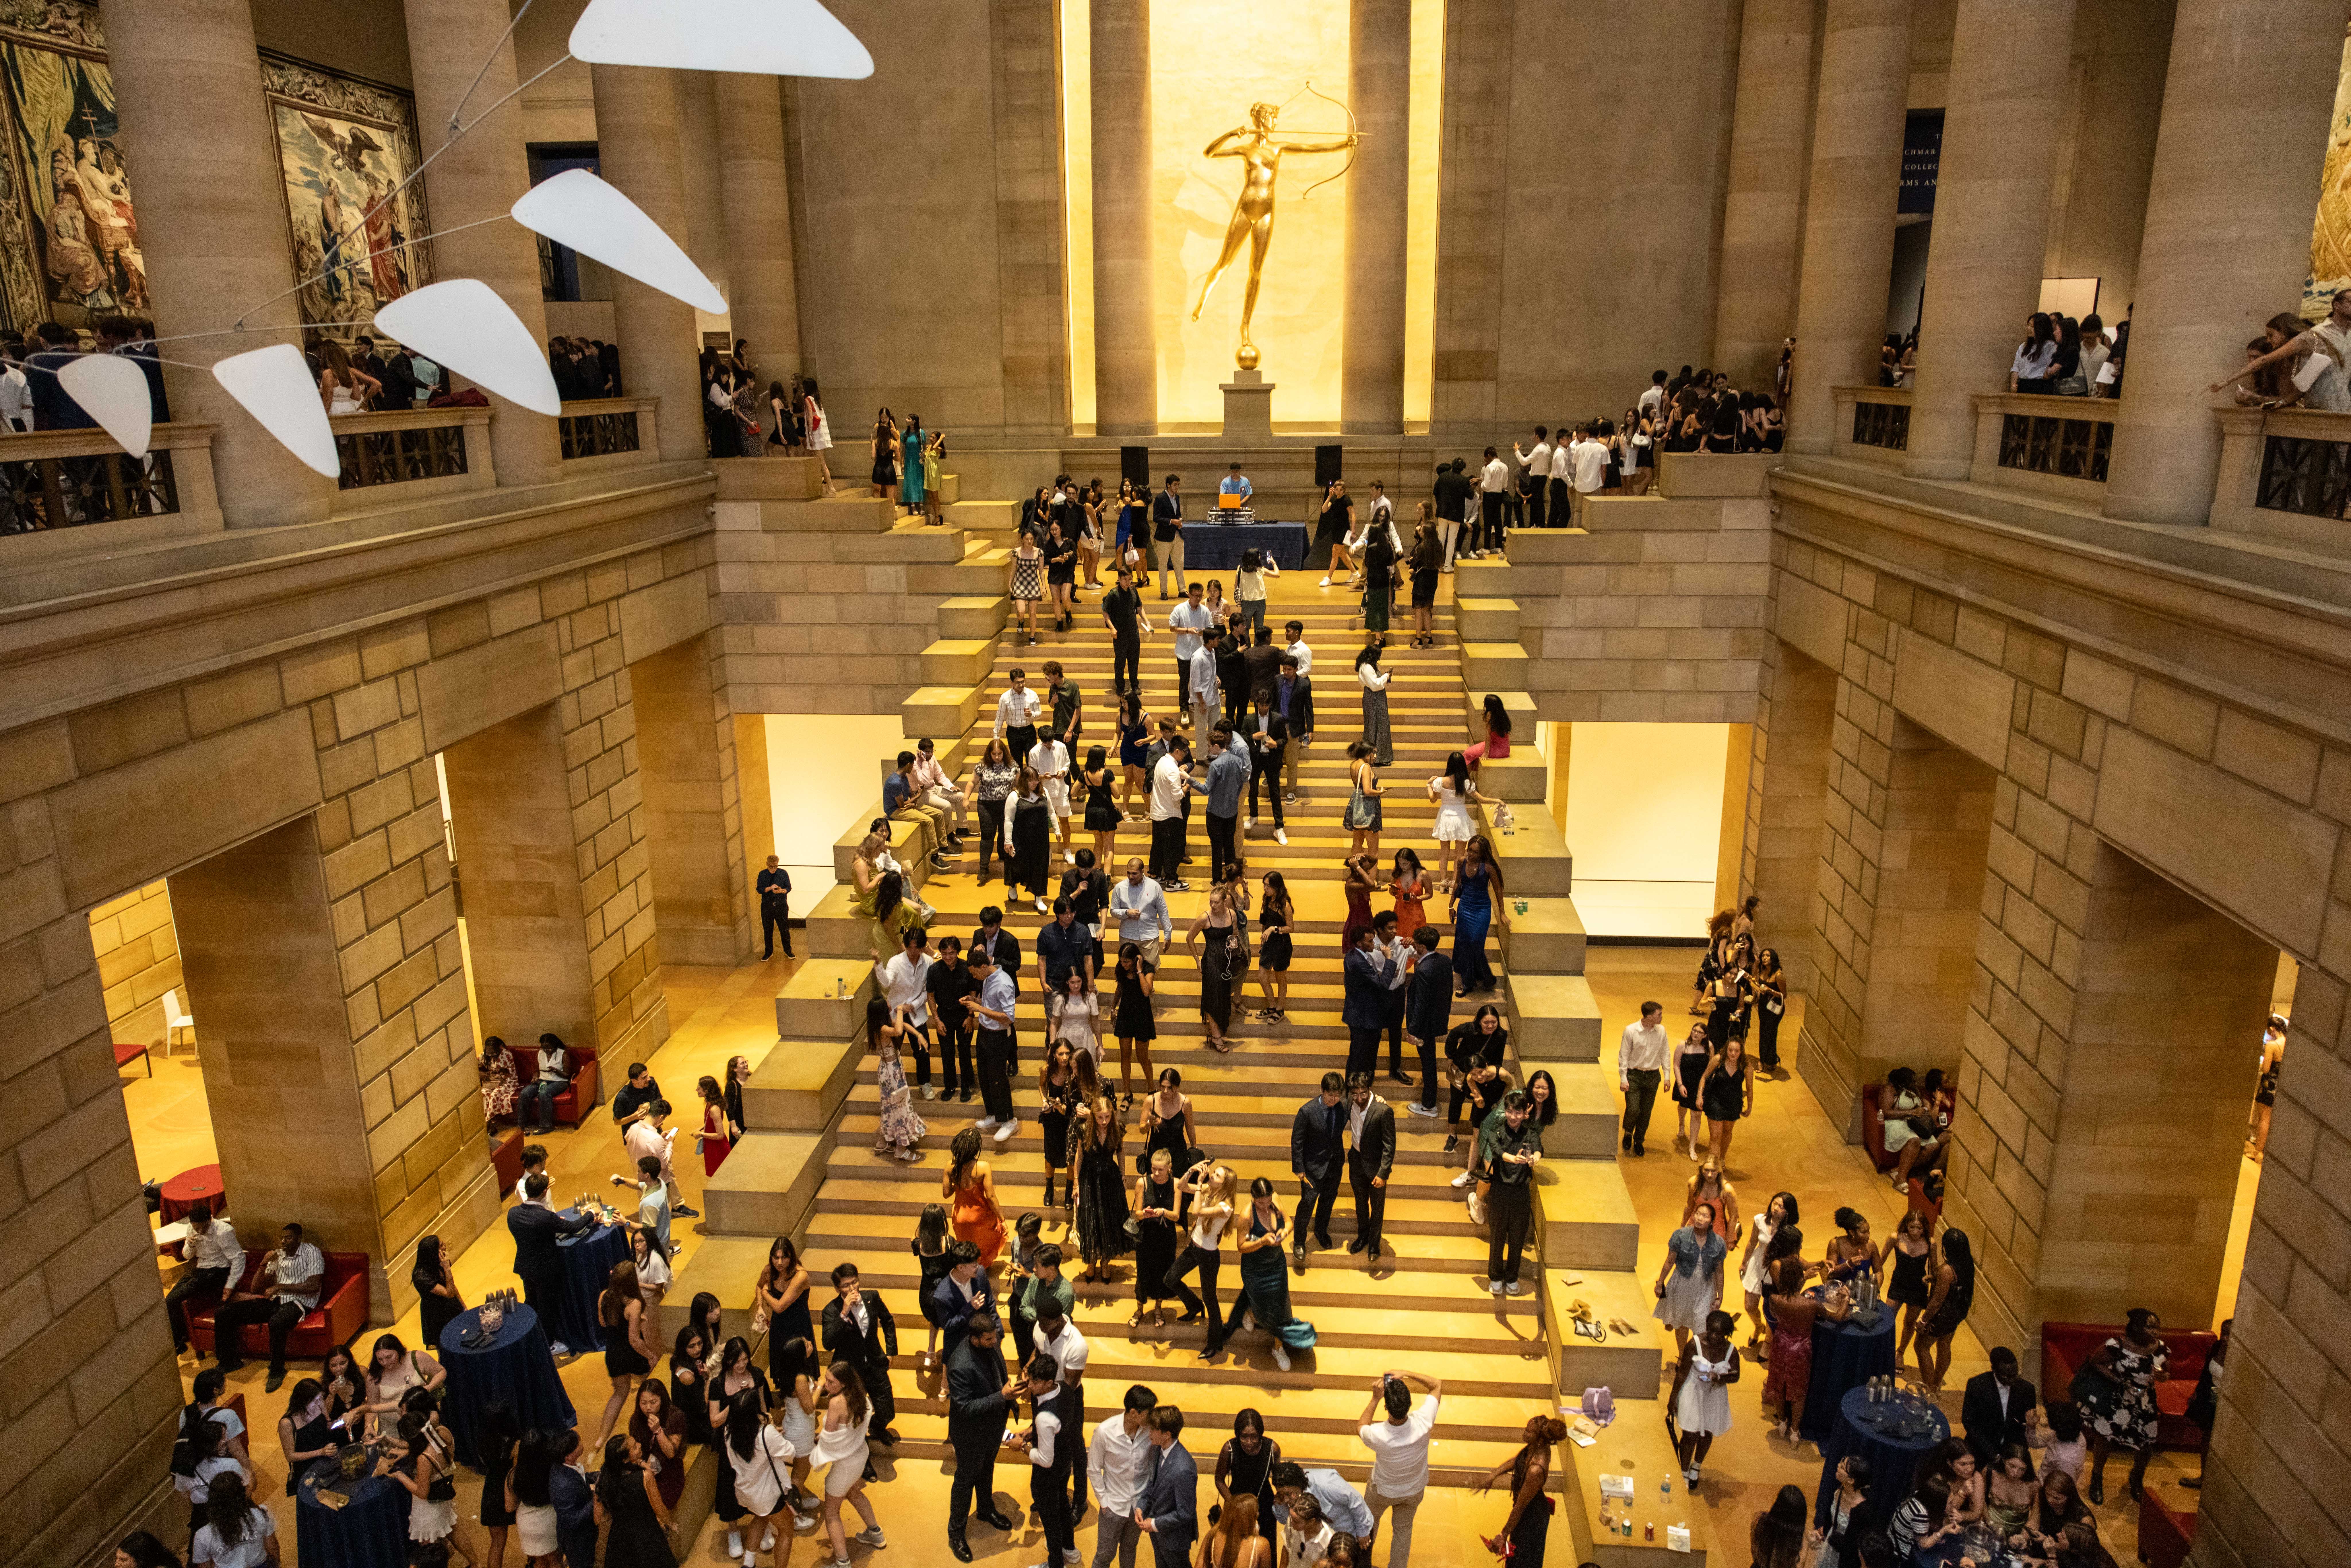 Students mill about on the Great Stair Hall in the interior of the Philadelphia Museum of Art. A gilded statue of Diana as an archer is in the background; Calder's Ghost mobile sculpture is in the foreground